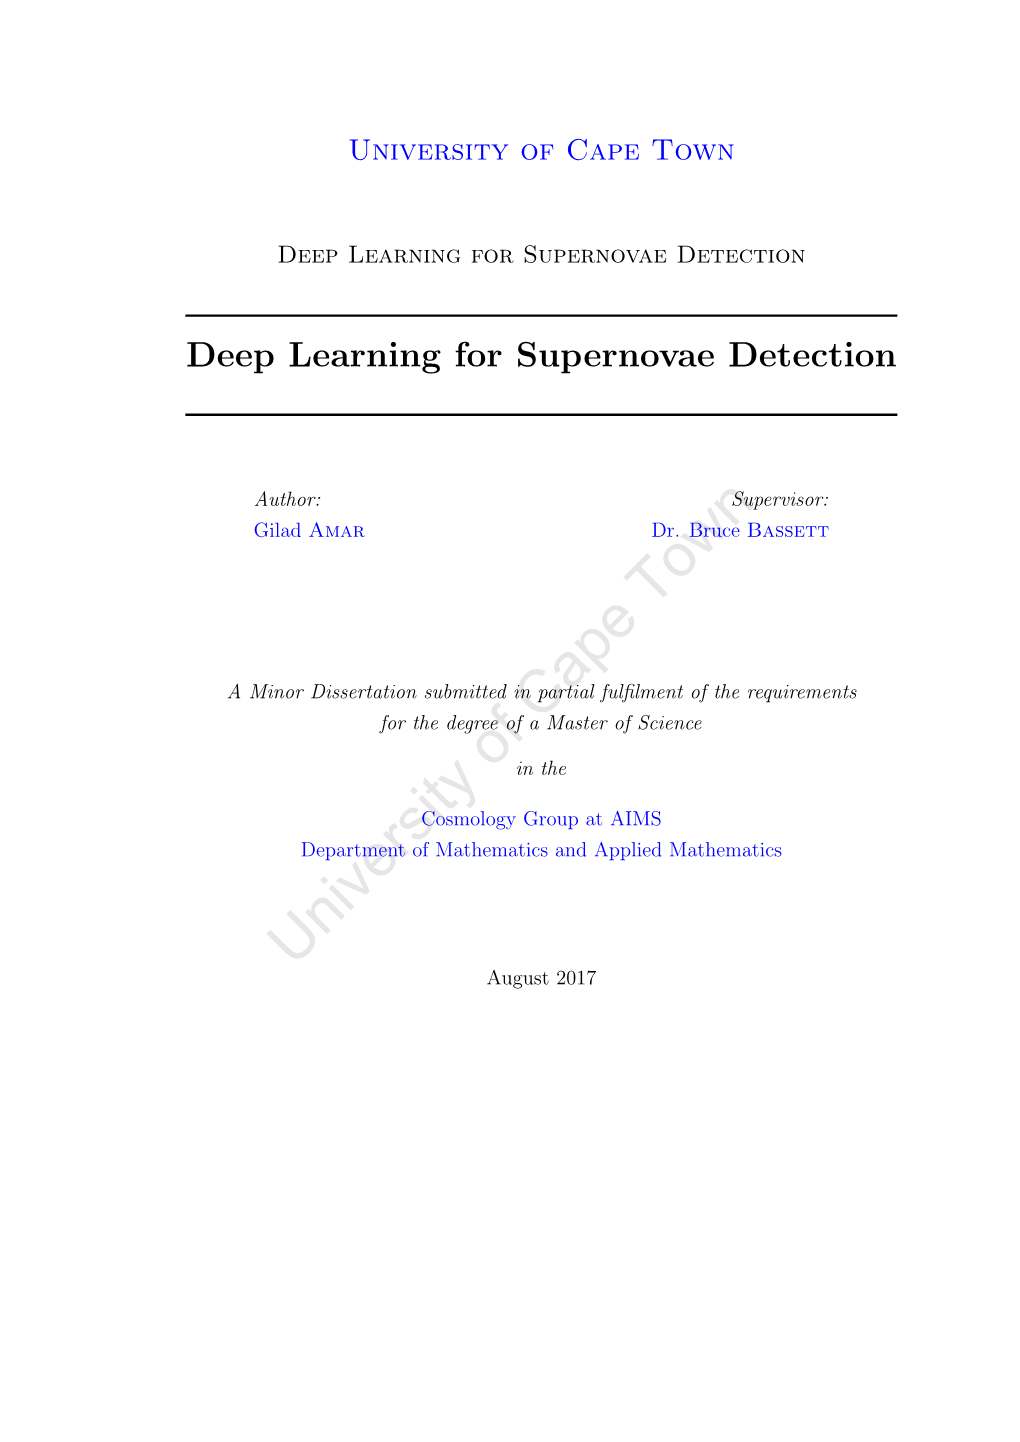 Deep Learning for Supernovae Detection